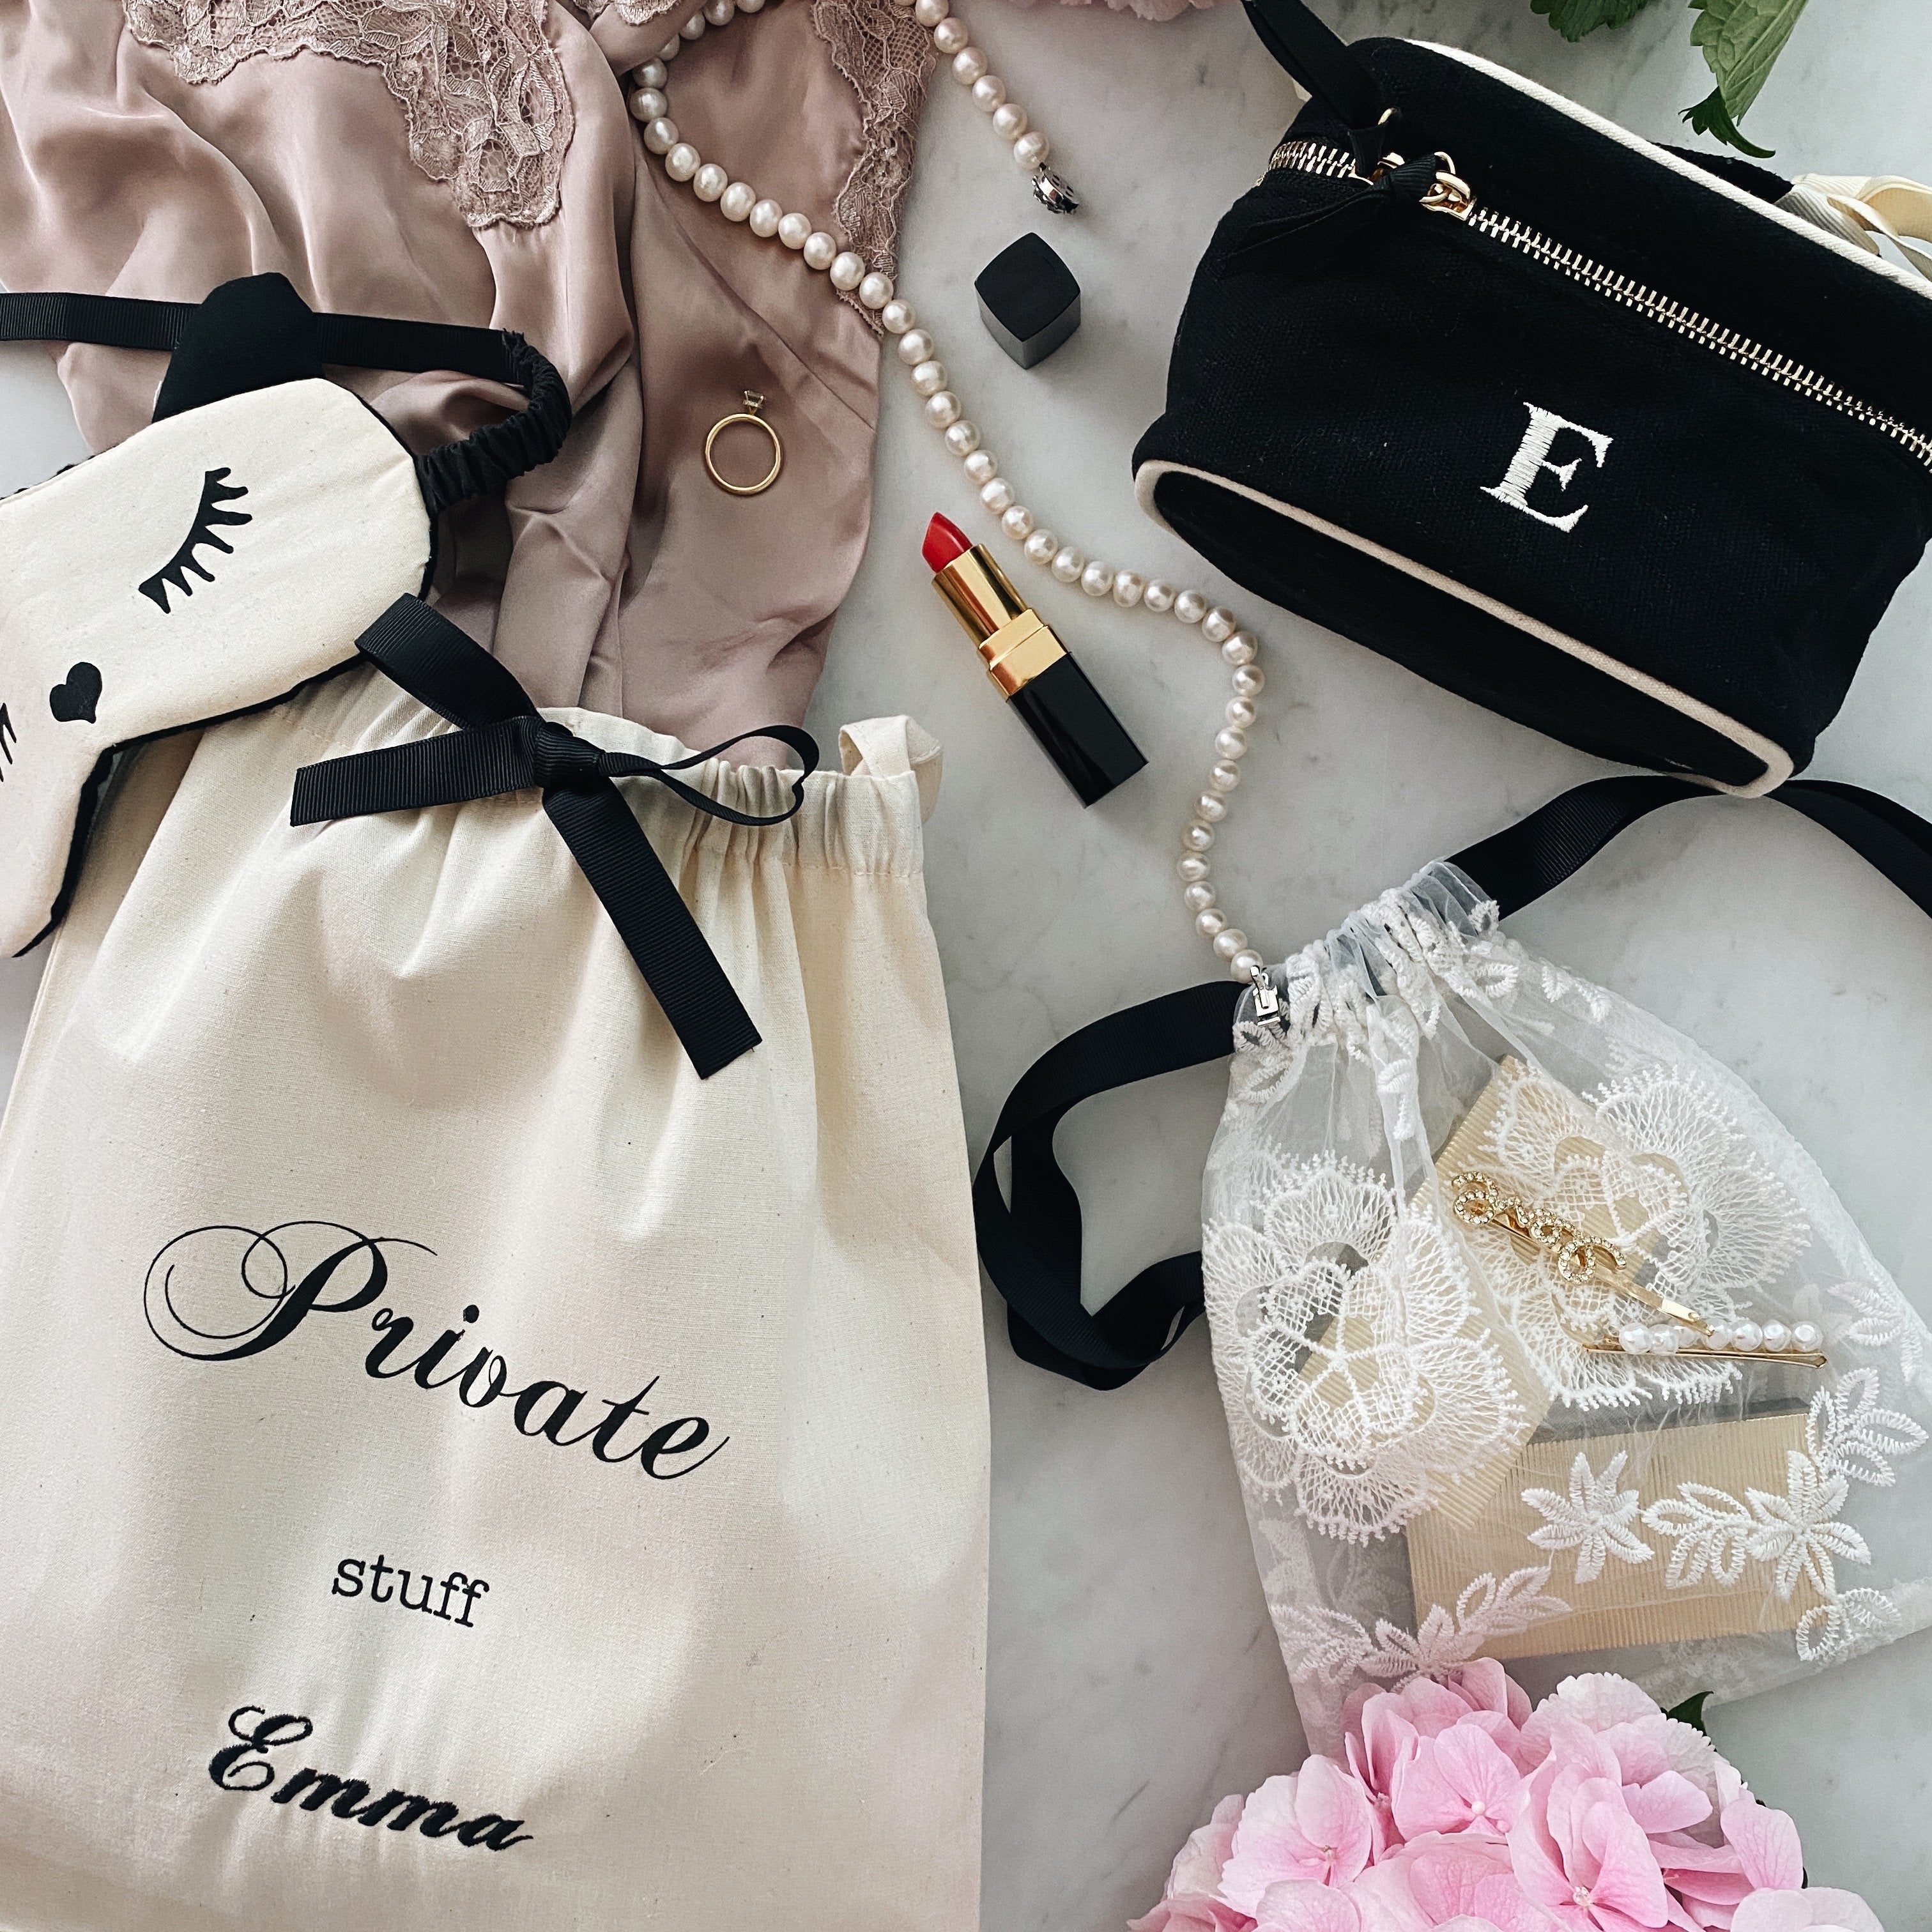 Lingerie, a bag labeled "private stuff" and a blank mini beauty box.